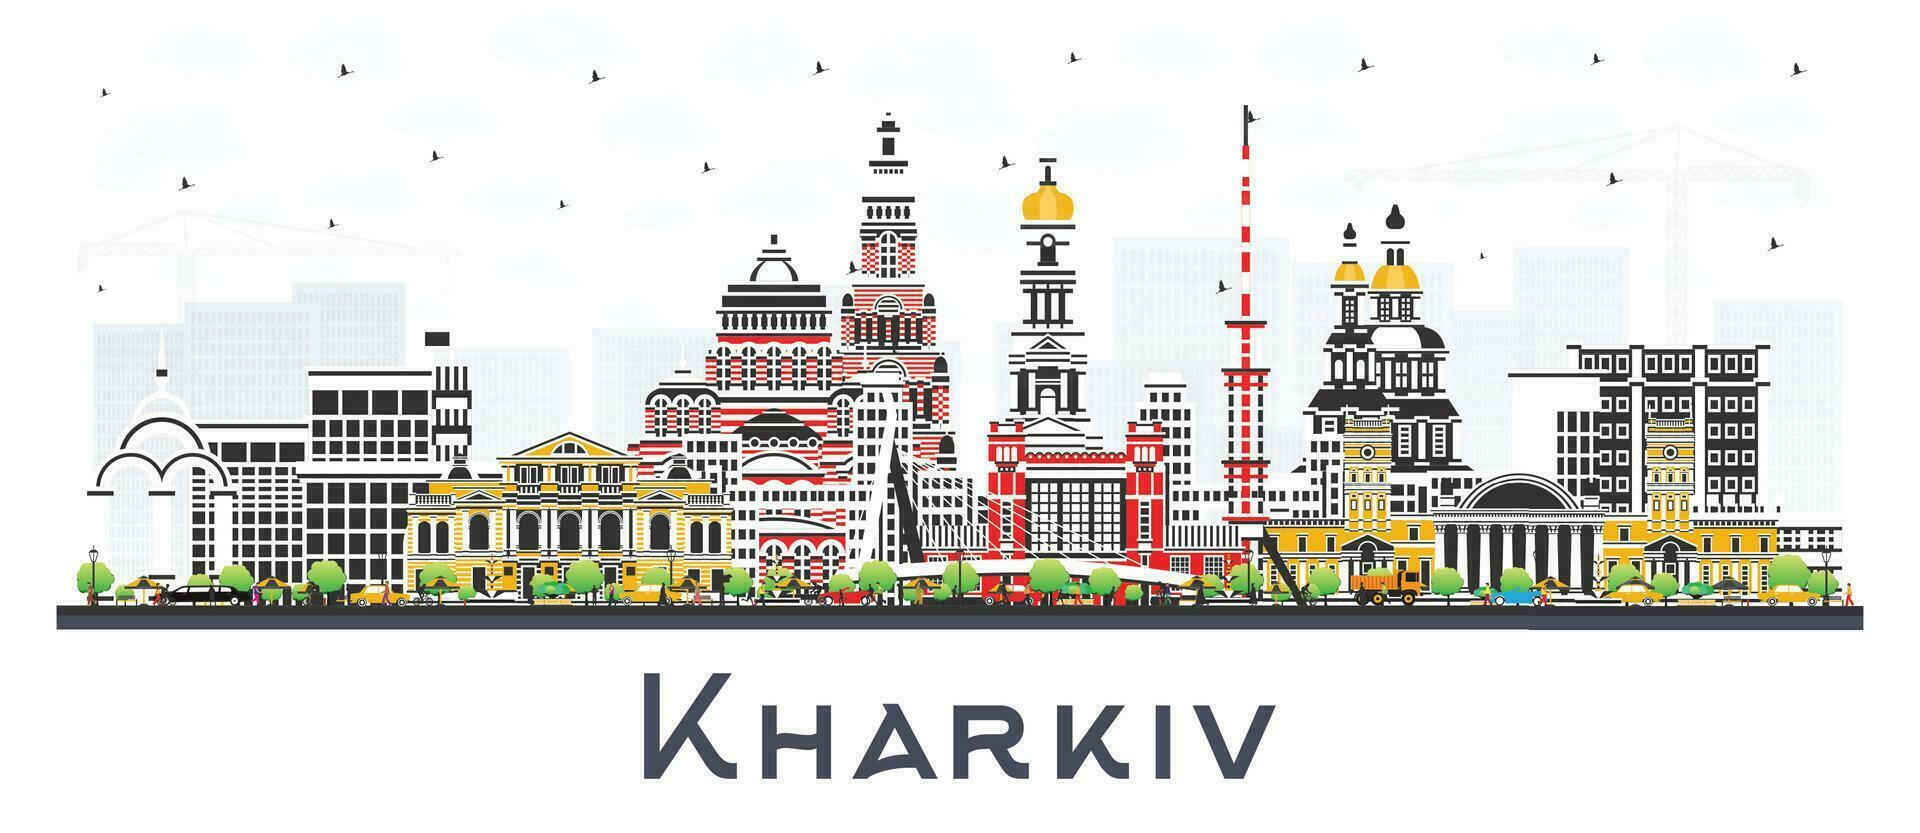 Kharkiv Ukraine City Skyline with Color Buildings isolated on white. Kharkiv Cityscape with Landmarks. Business Travel and Tourism Concept with Historic Architecture. vector